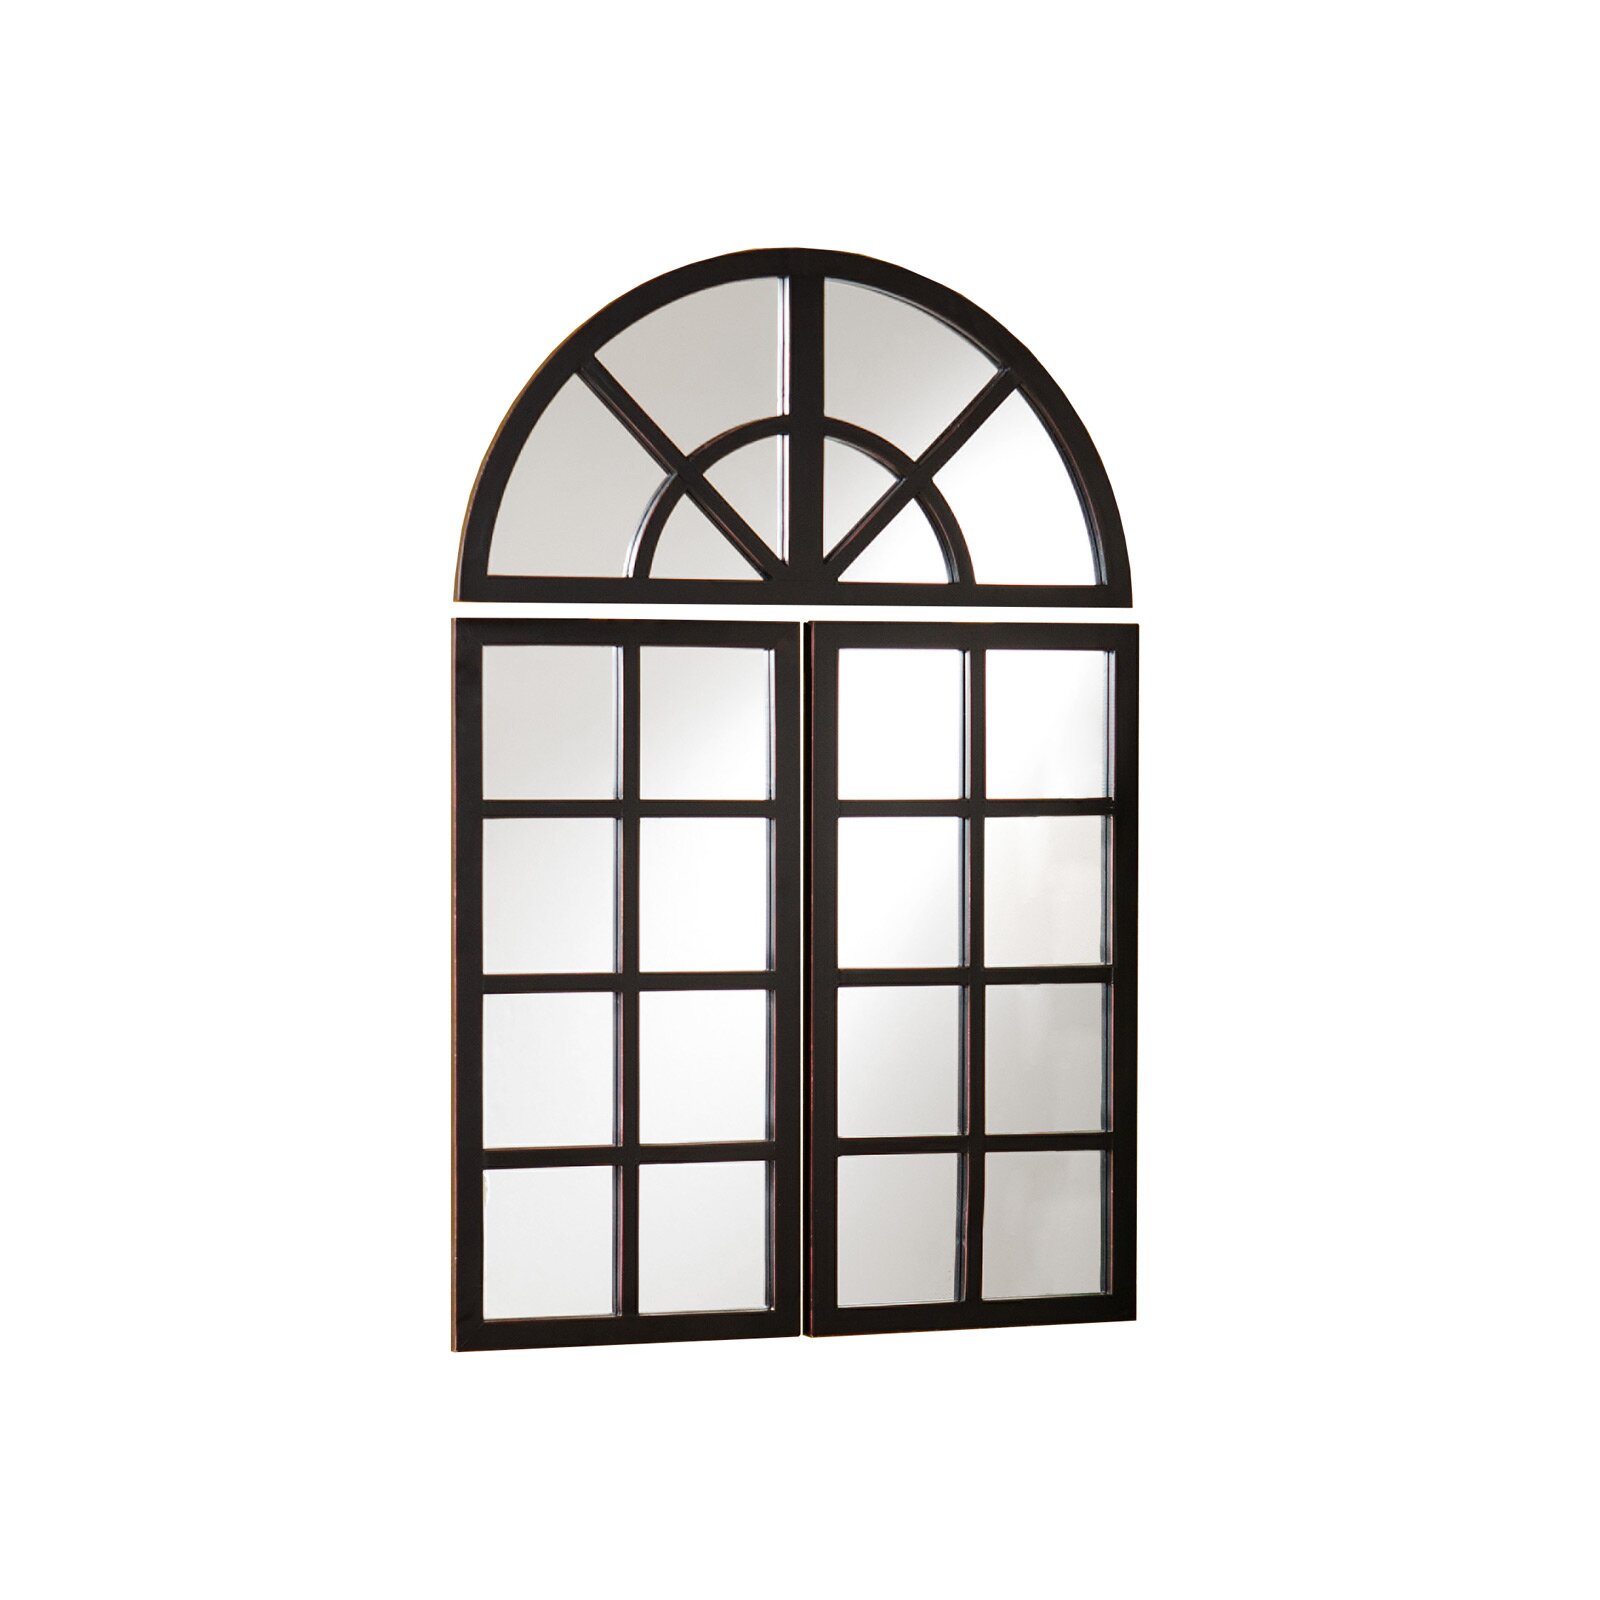 Windowpane Mirror for Exciting Your Home Design: 8×10 Mirror | Arch Mirrors At Big Discounts | Windowpane Mirror